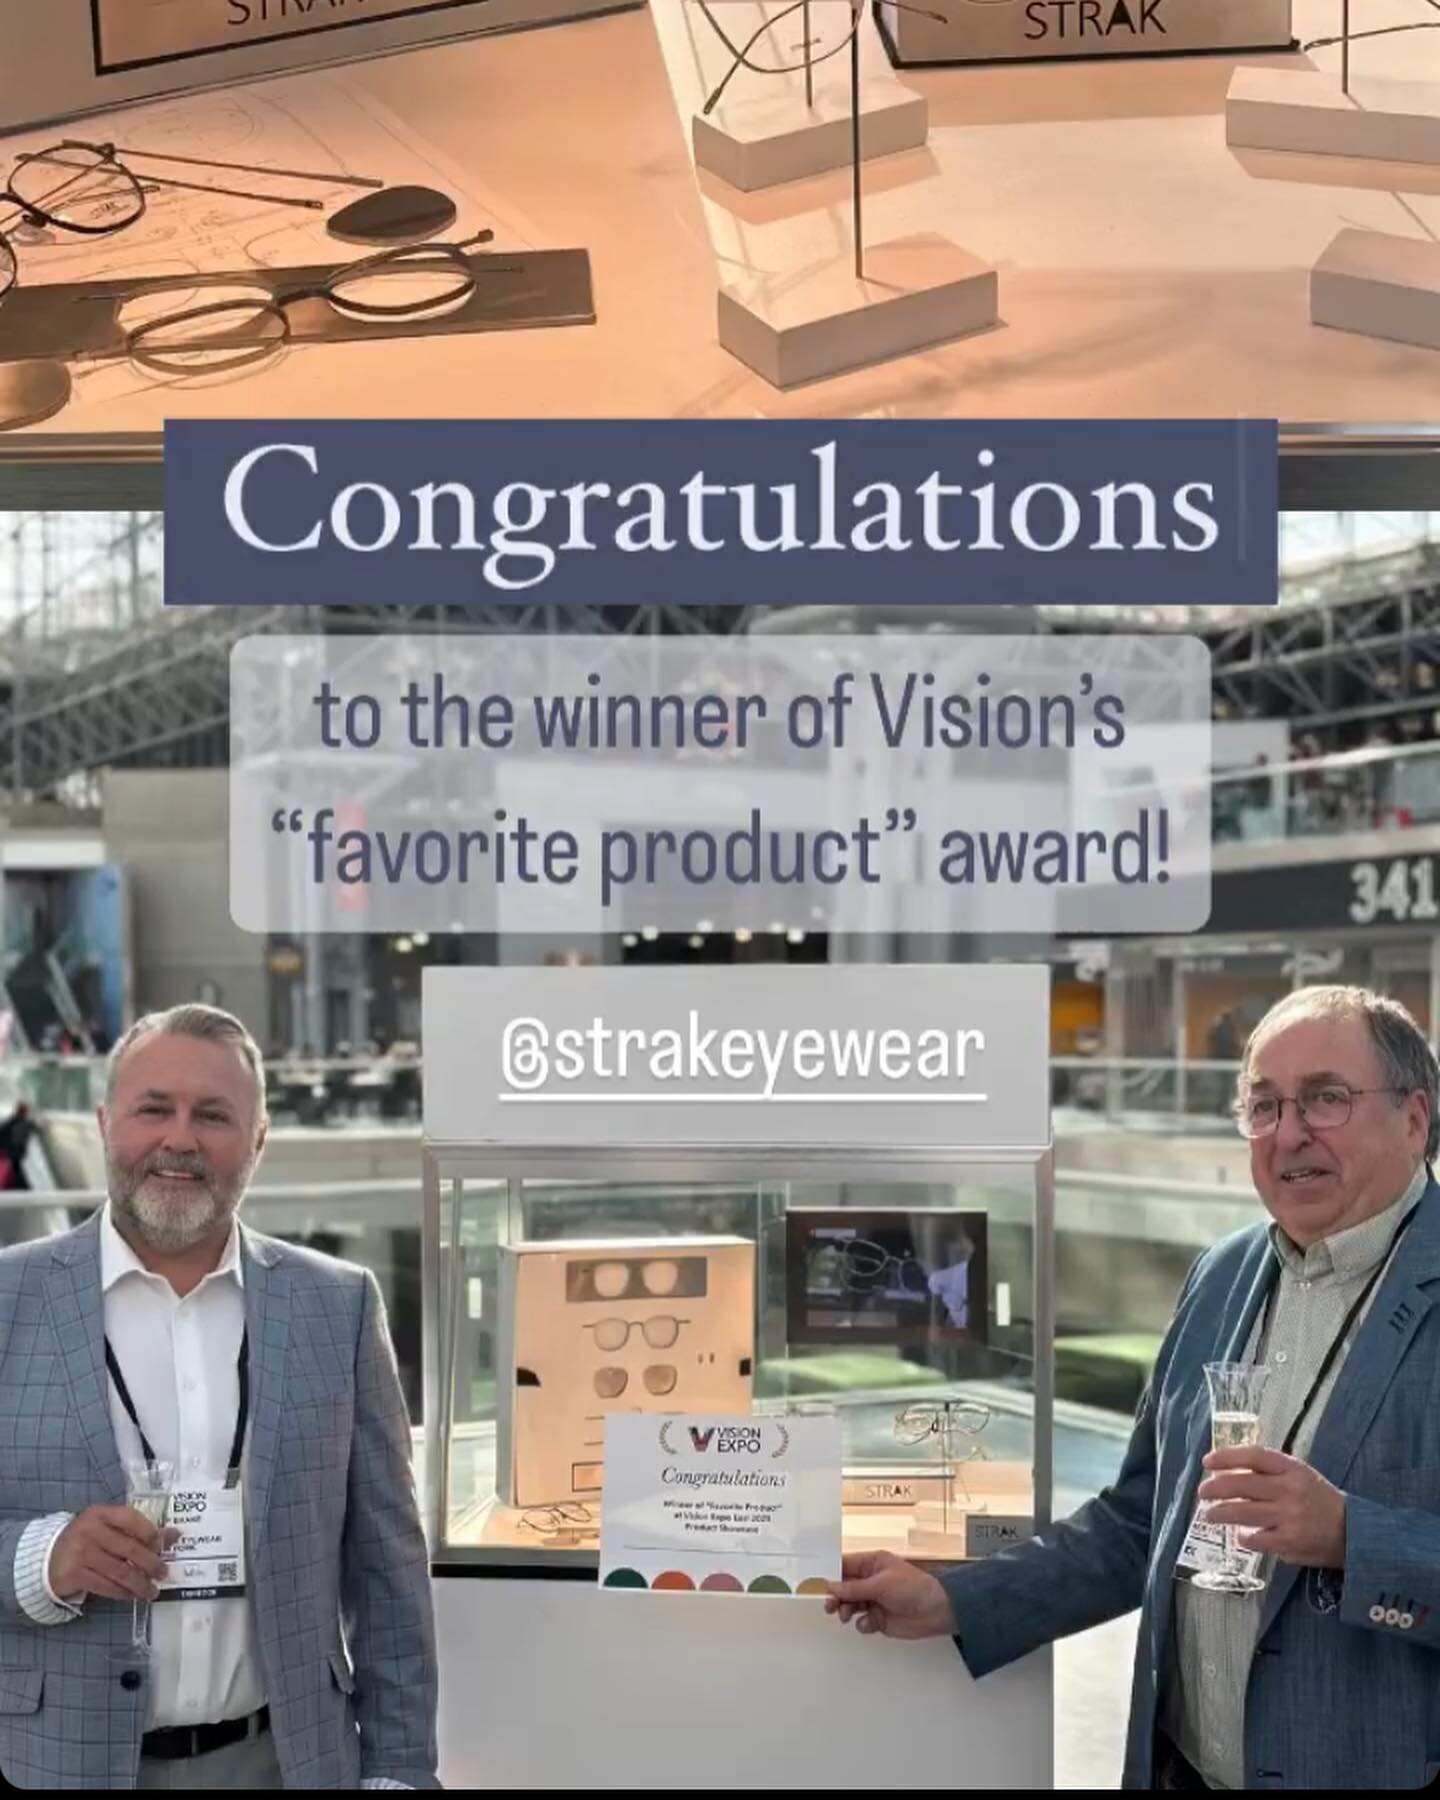 Thank you everyone who voted for Strak! Come see why the collection won both the People&rsquo;s Choice and Favorite Product 😉 and come visit our booth #U1803 tomorrow on the last day of Vision Expo East!